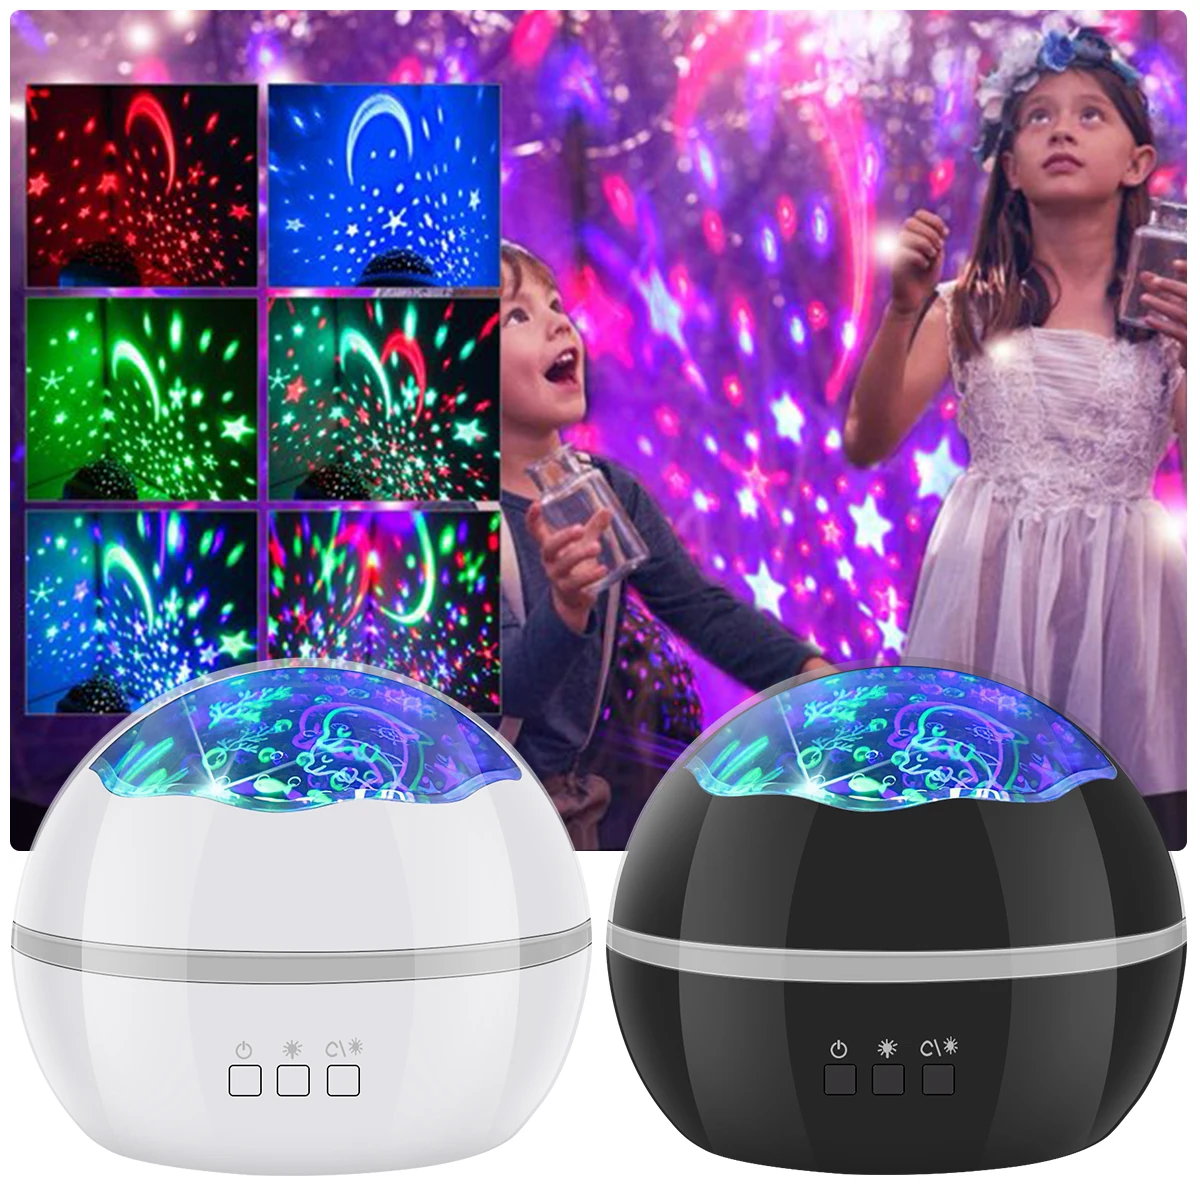 

NEW Sky Projector Lamp Starry Sky Ocean Projector Night Lights for Kids Night Light Projector with 2 Projection Films 8 Colors